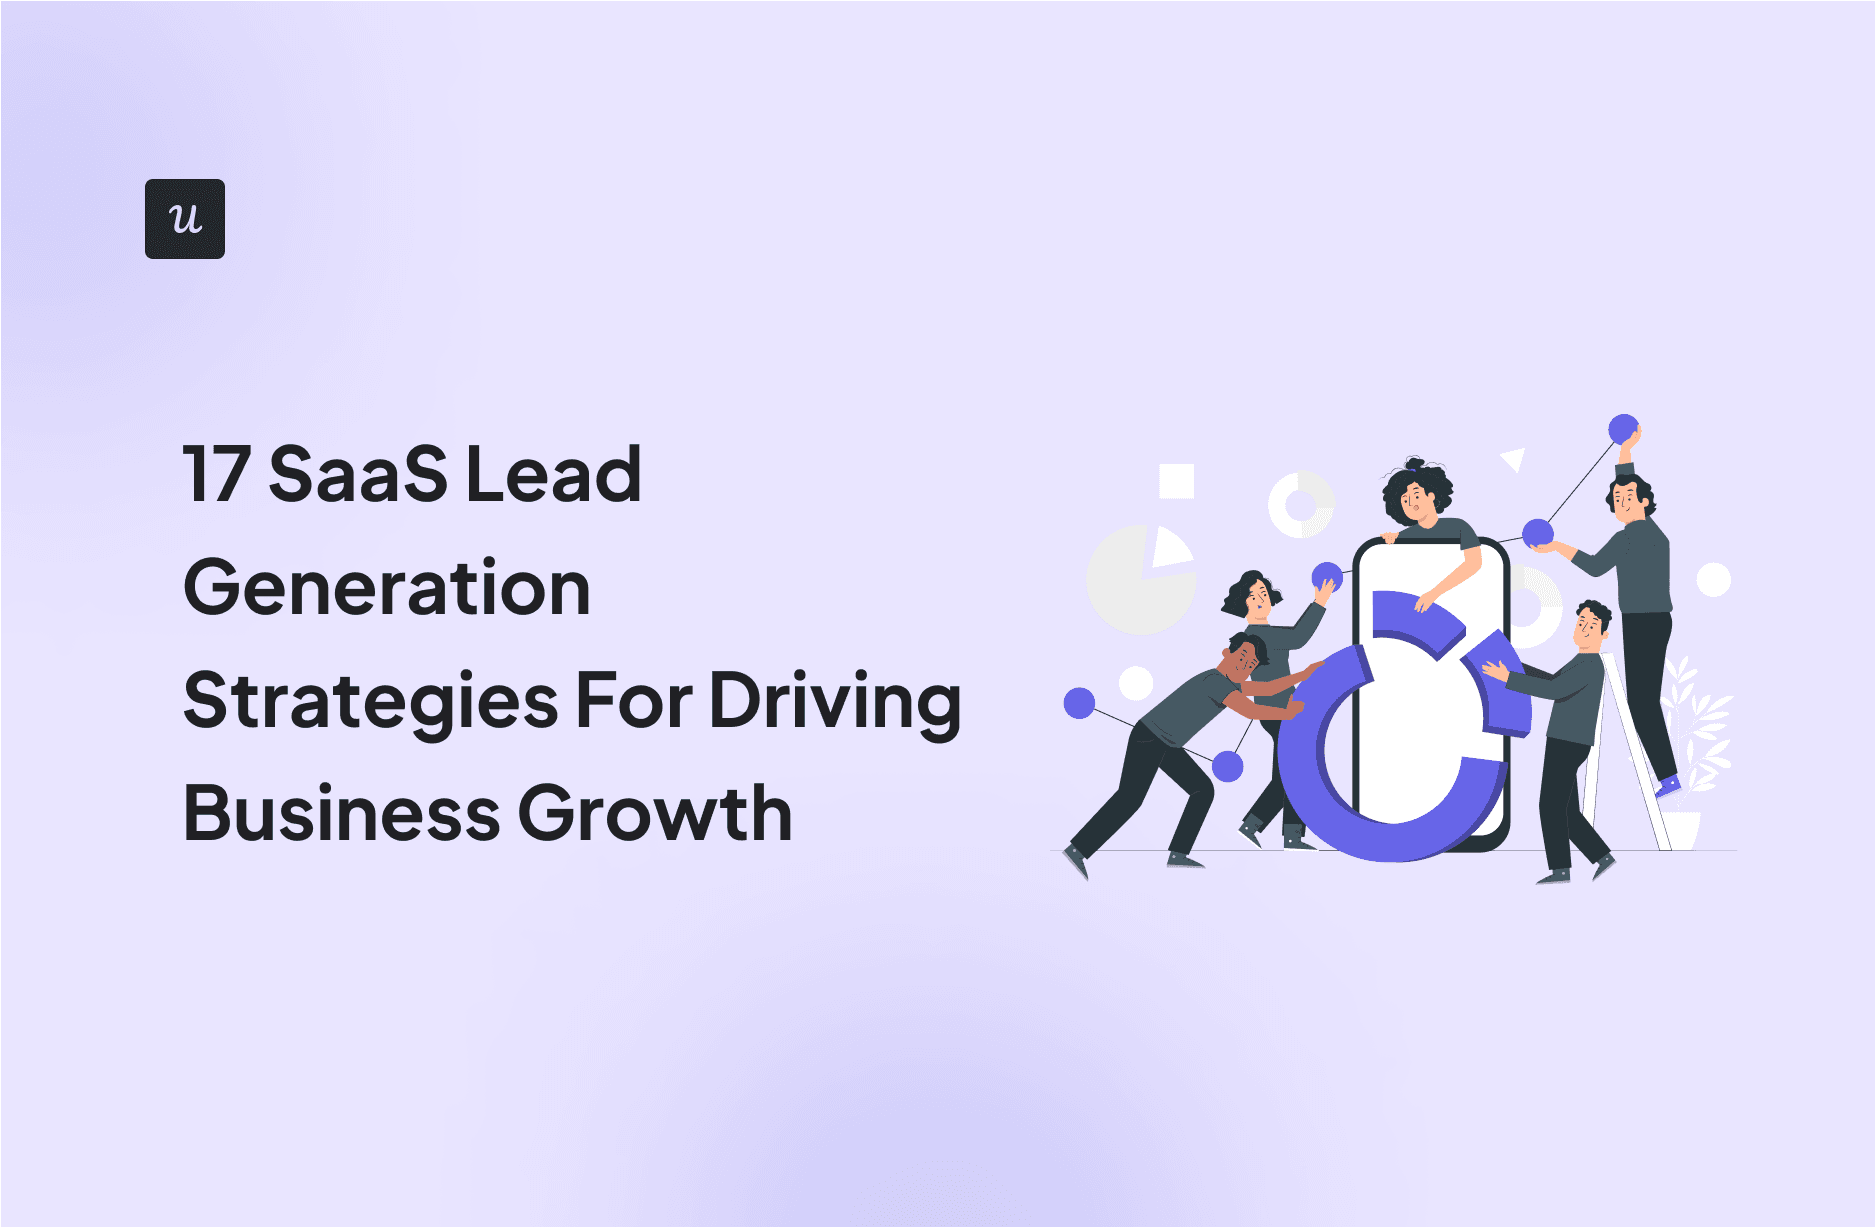 17 SaaS Lead Generation Strategies For Driving Business Growth cover